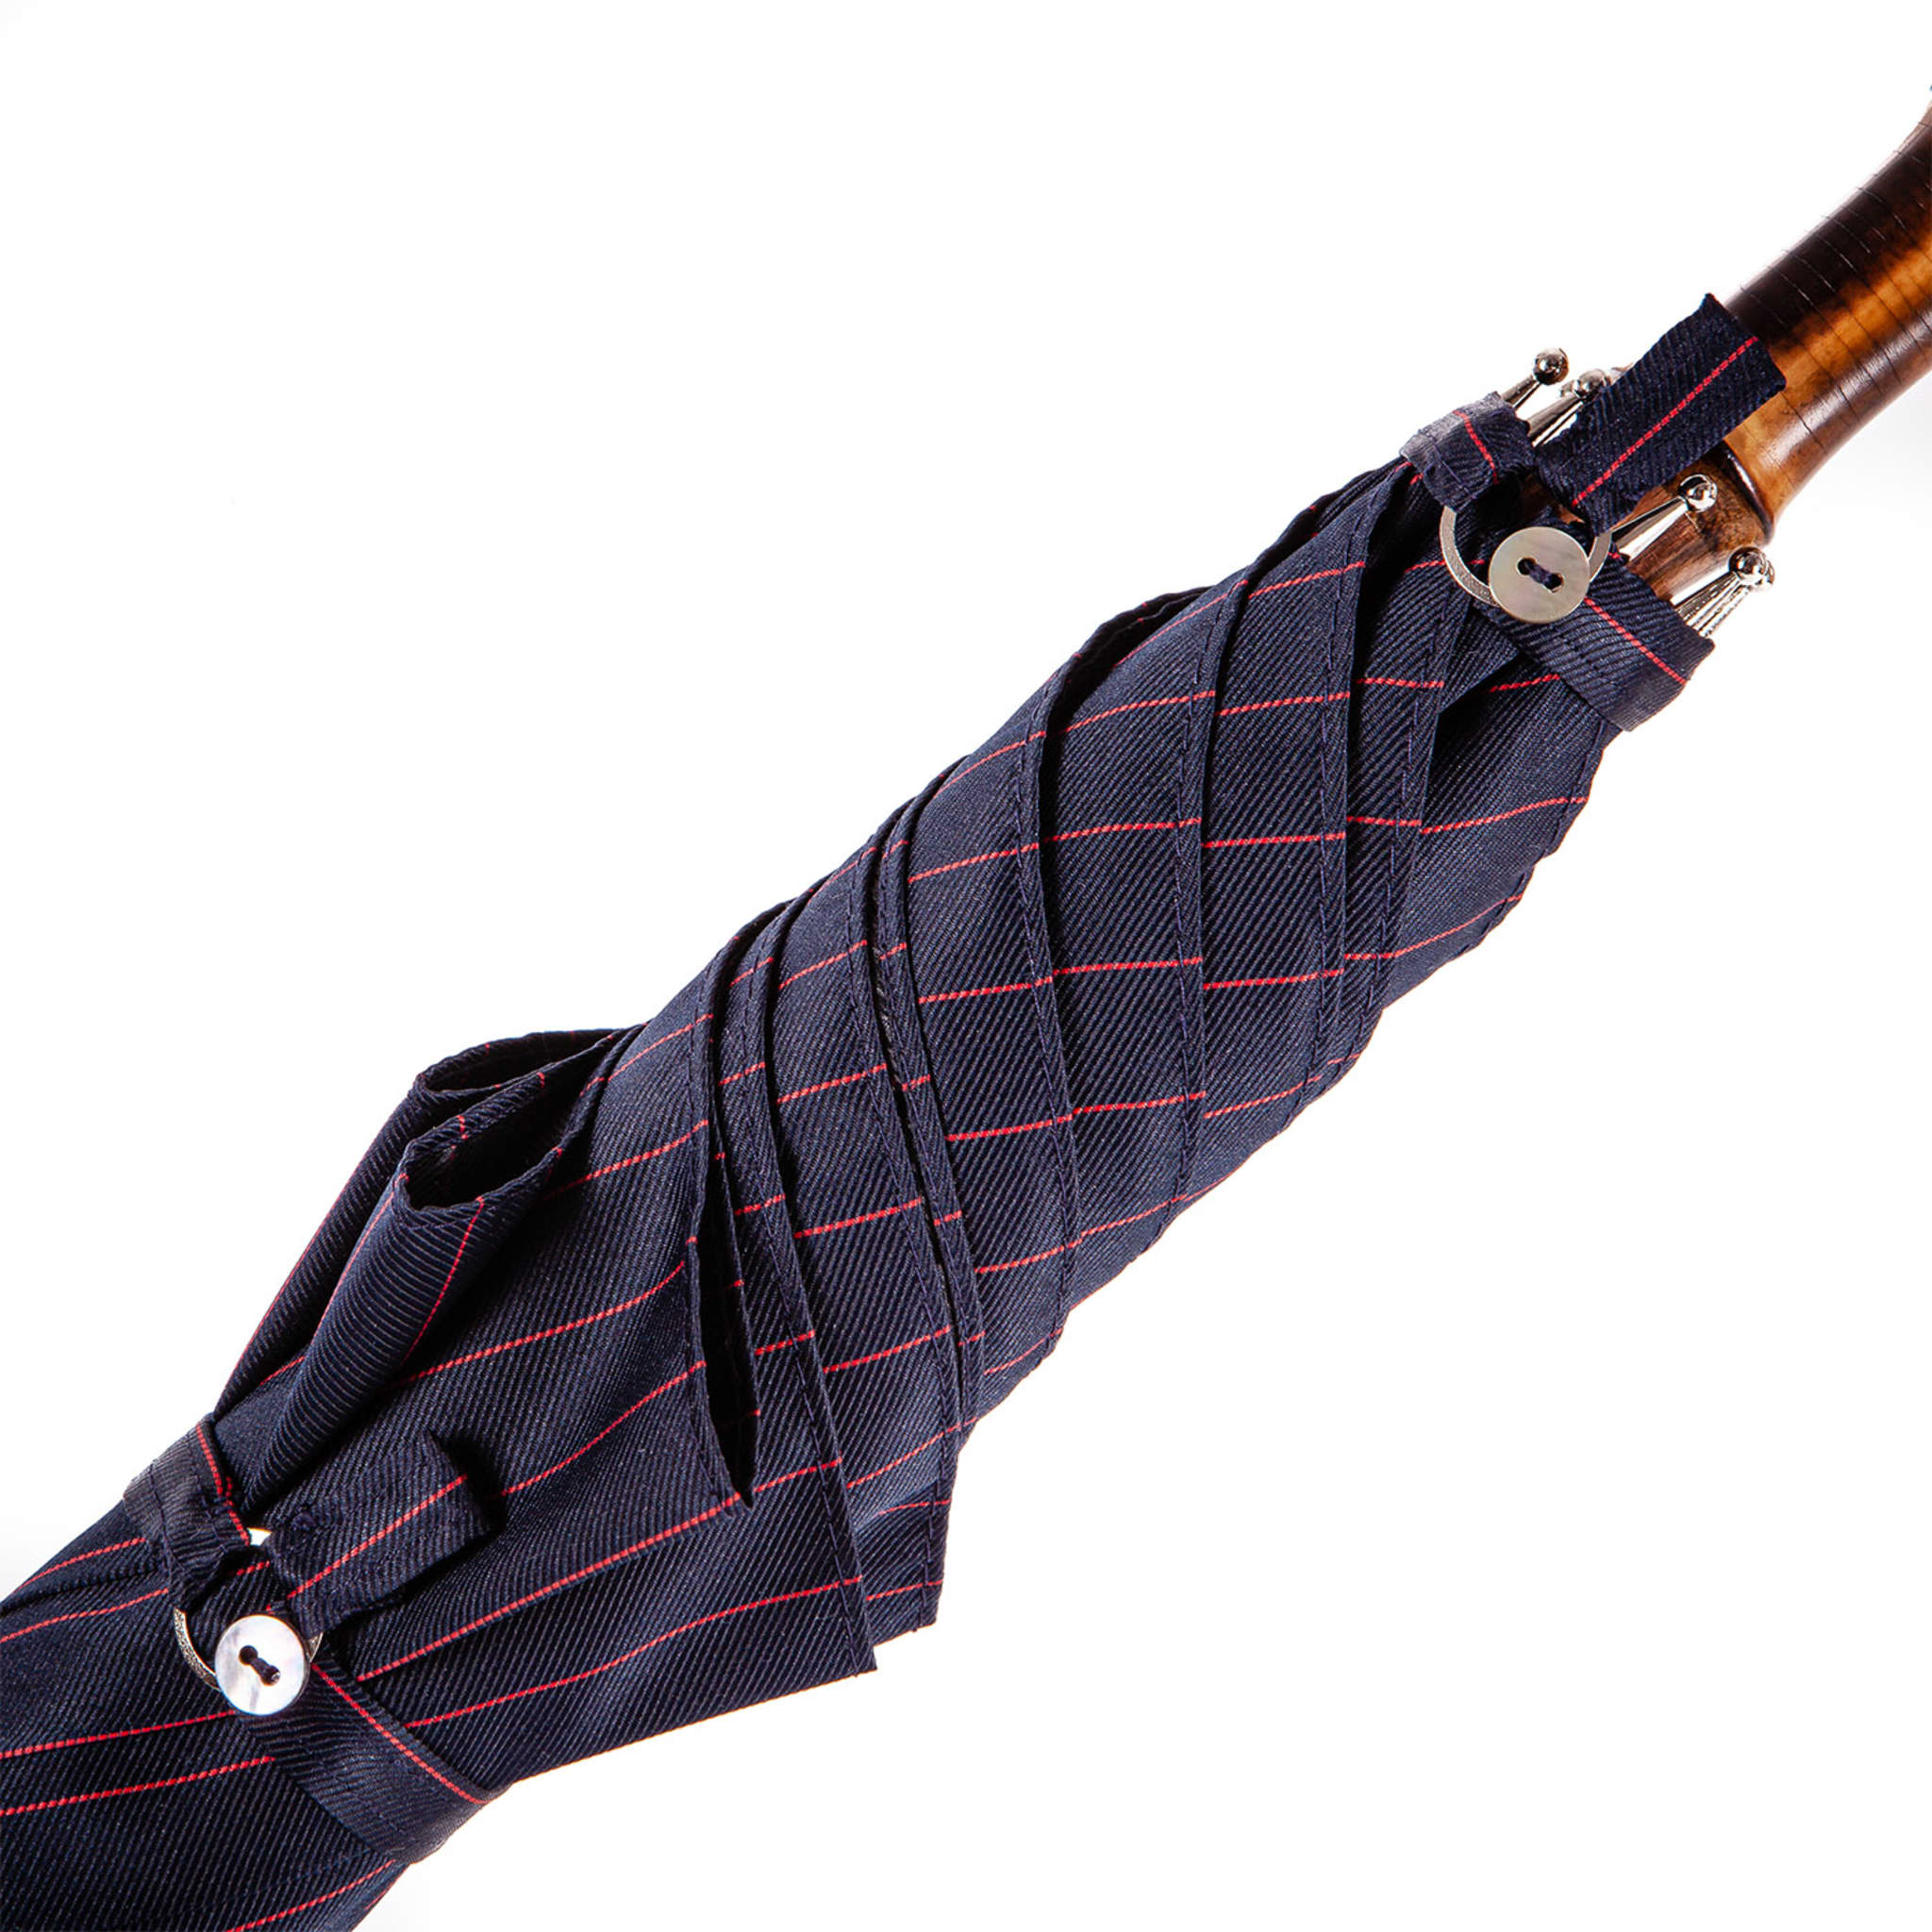 Japanese Bamboo Navy and Red Umbrella - Alternative view 2